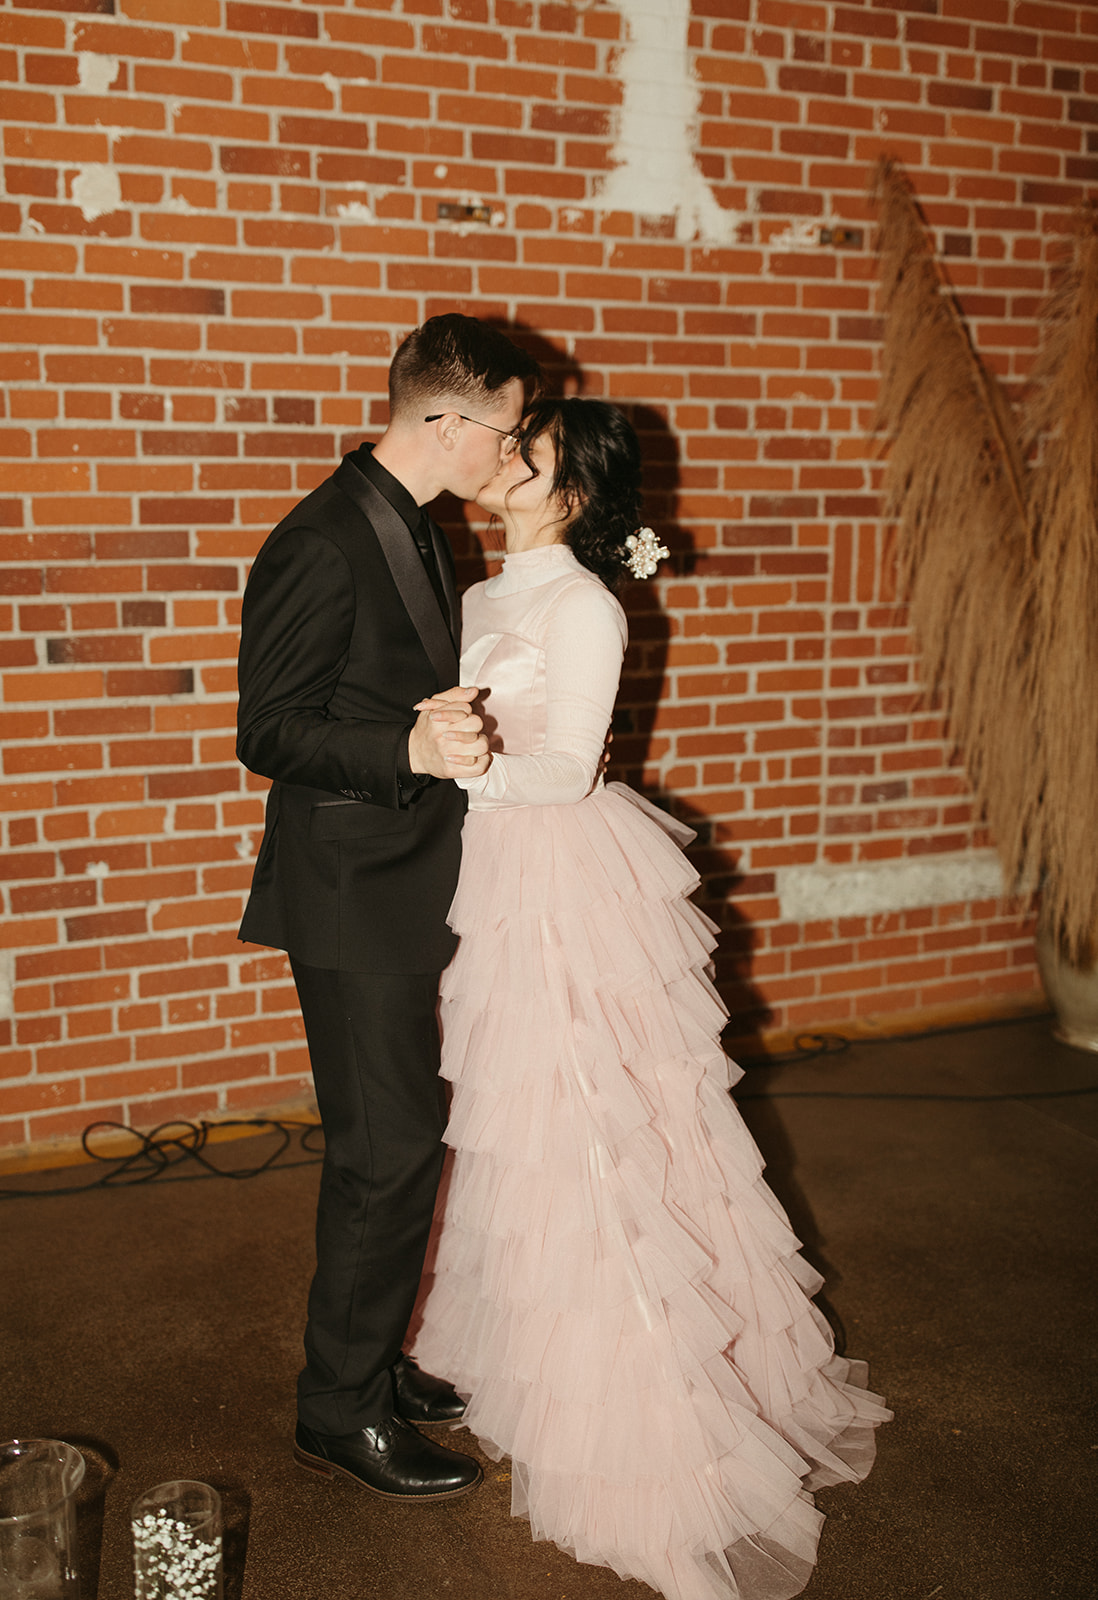 Couple has first dance at this vintage inspired boho wedding, ruffled bridal gown